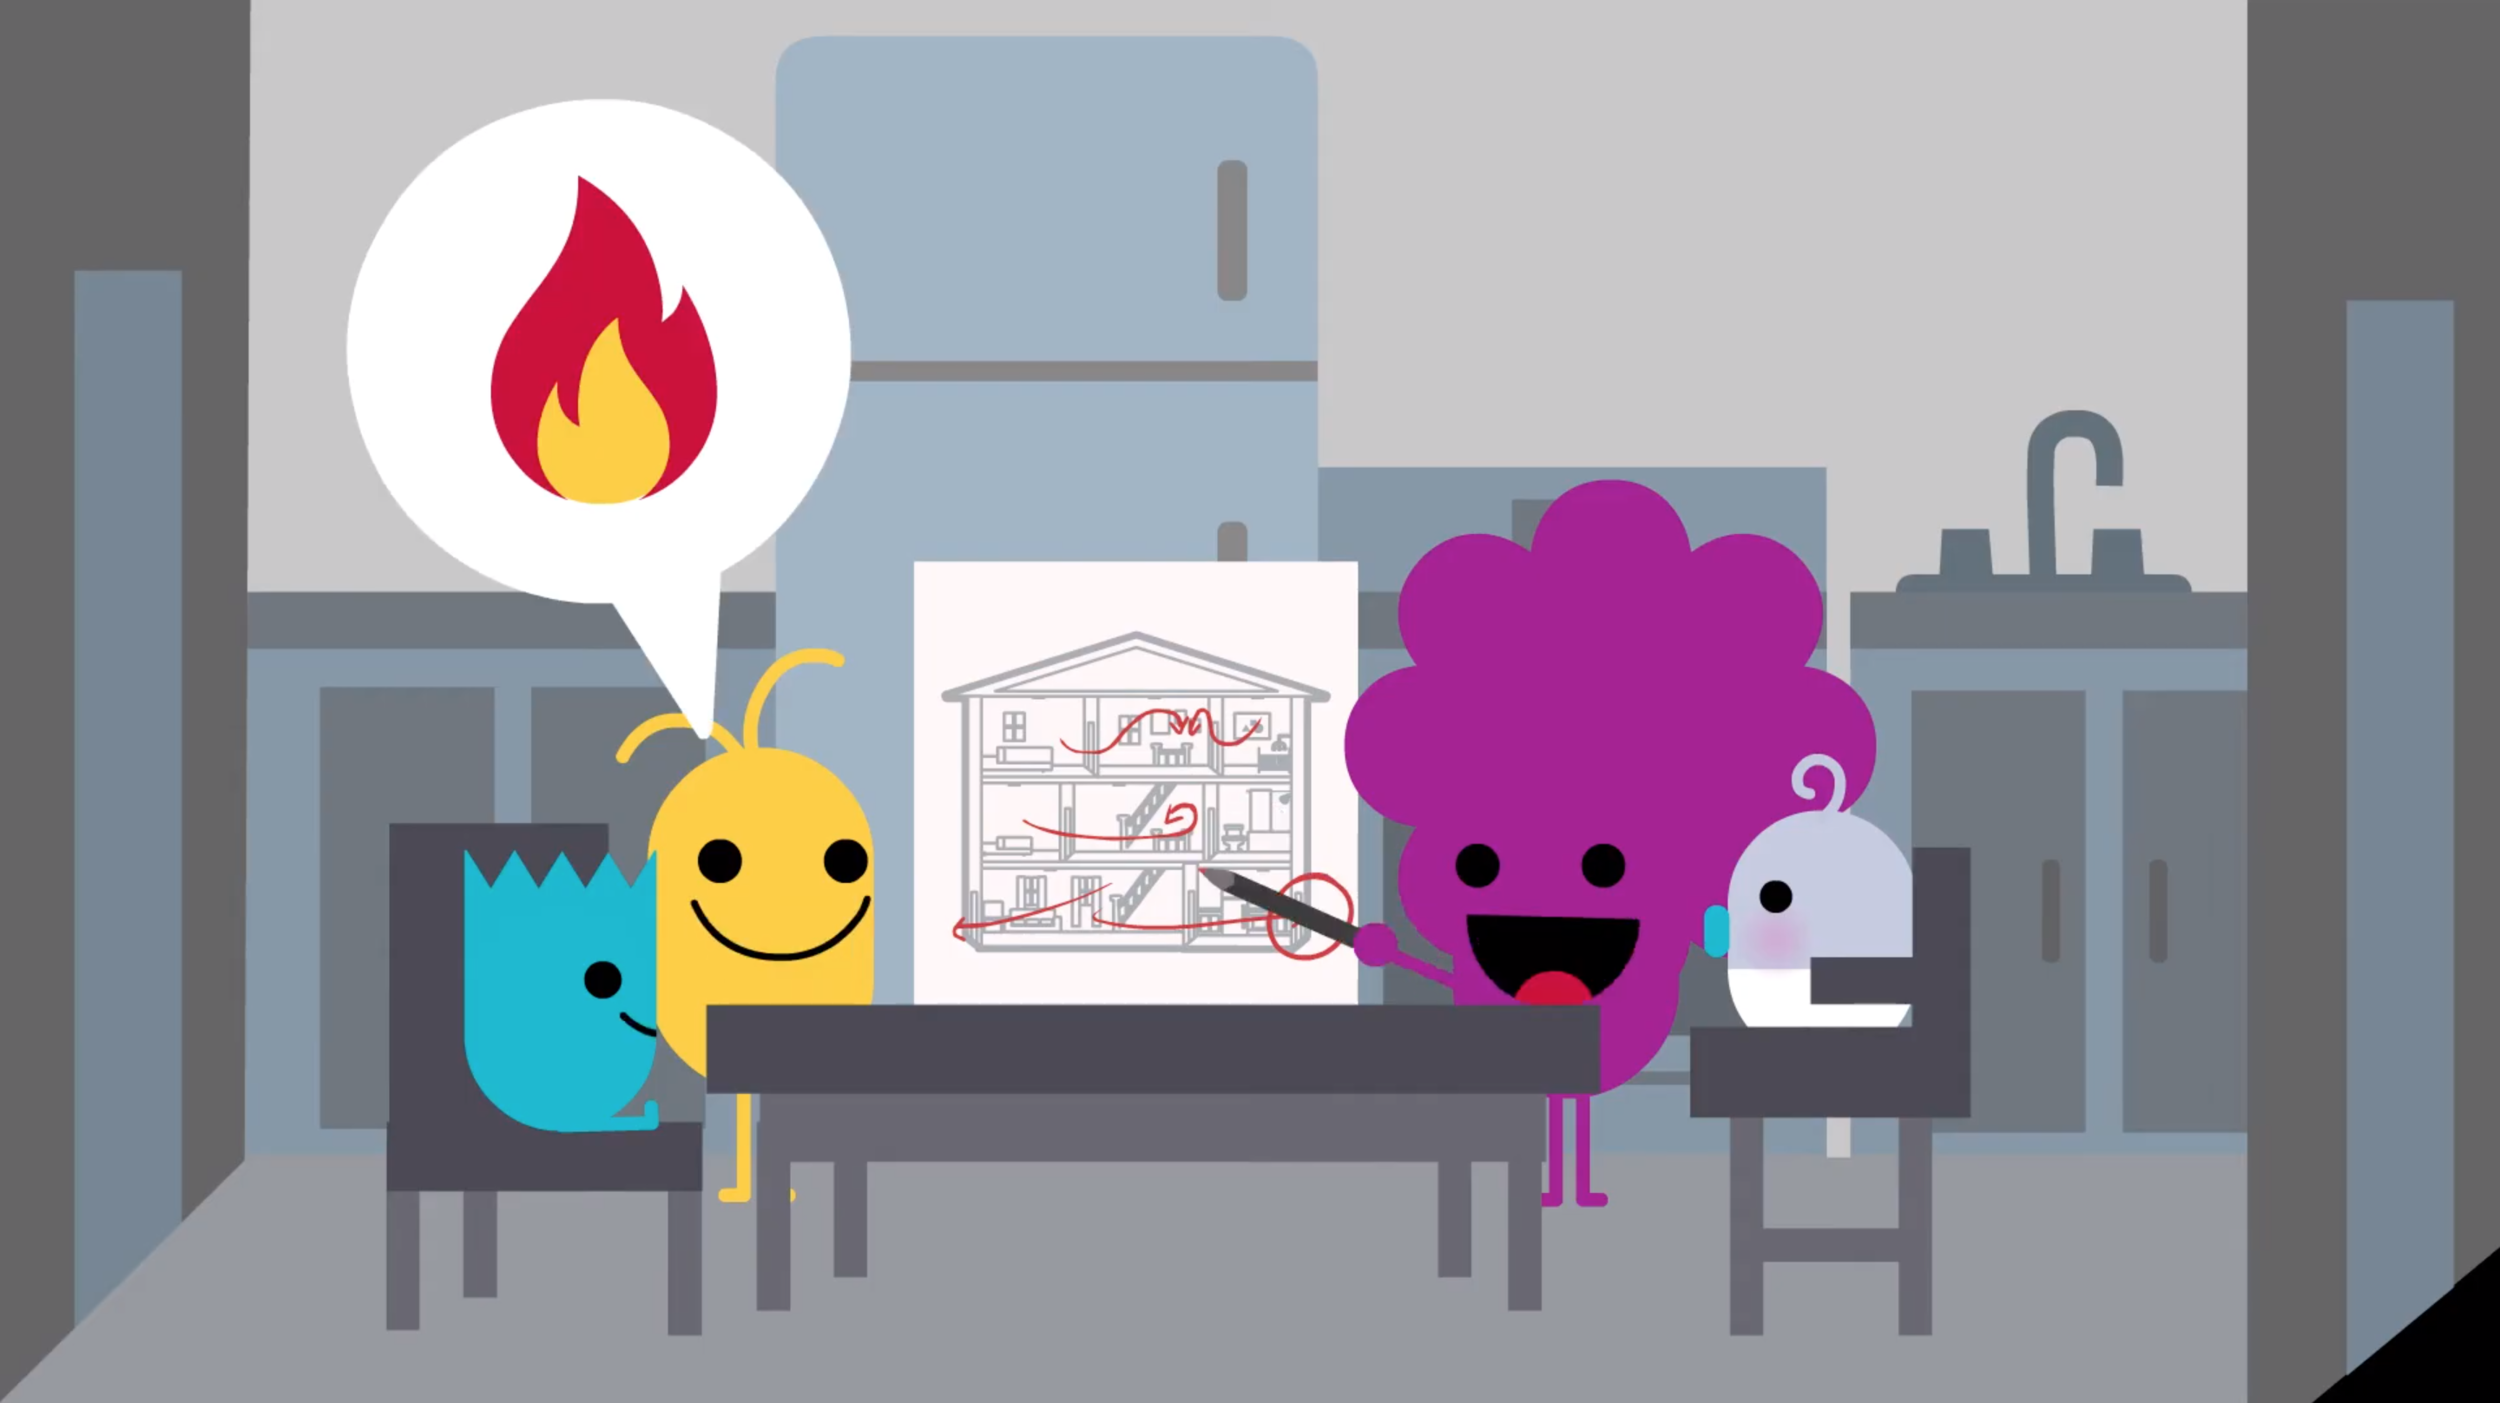 Fire Safety Animation